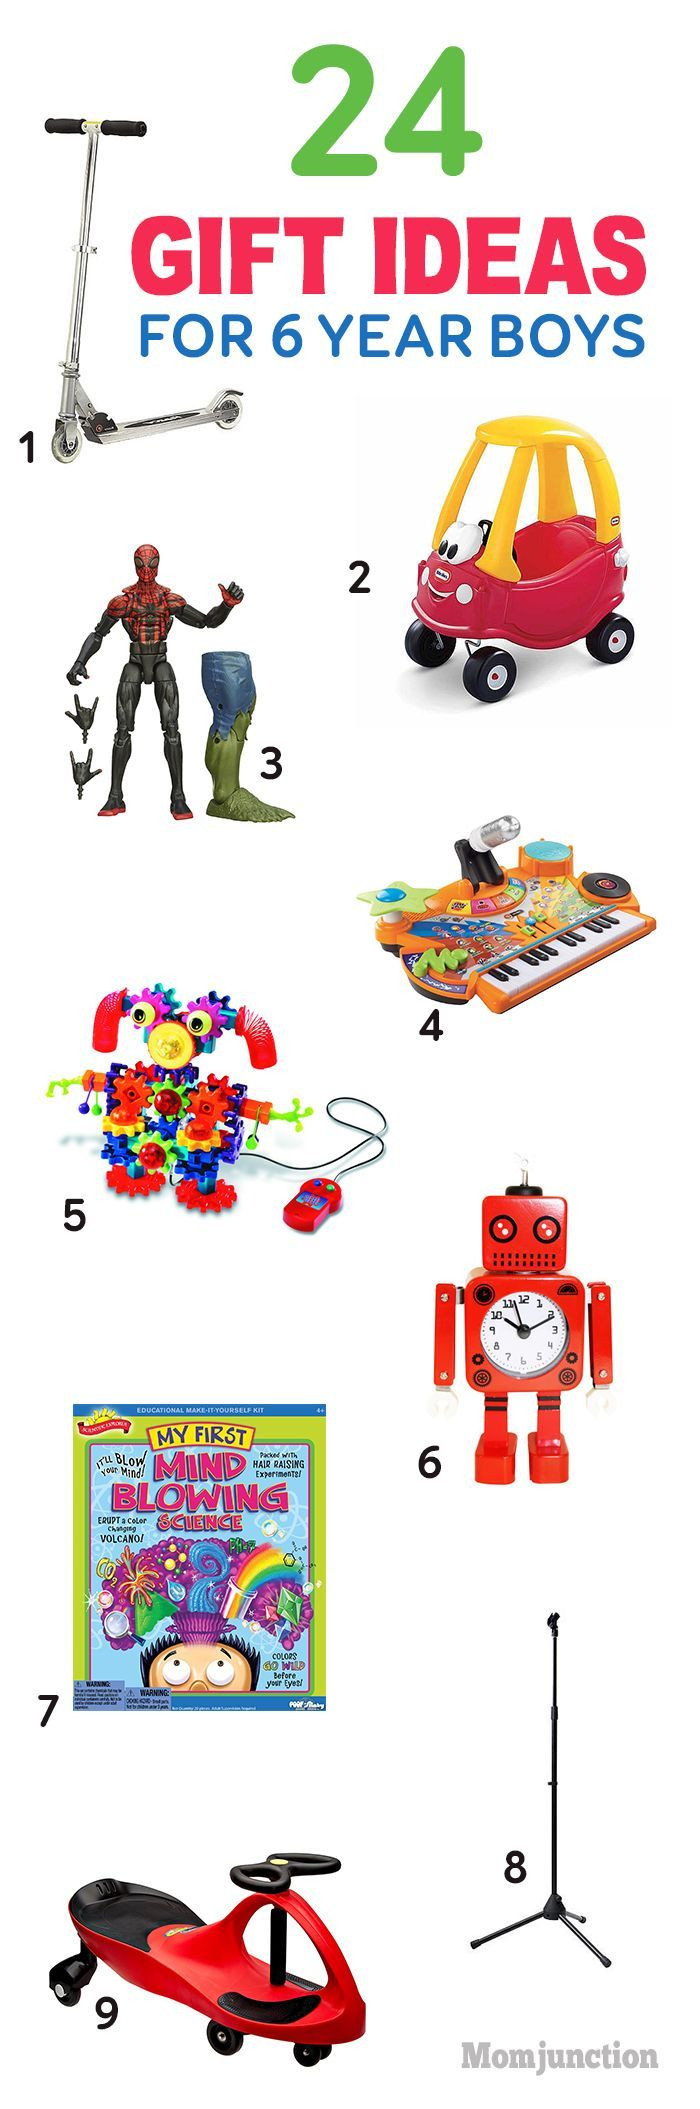 7 Year Old Boy Christmas Gift Ideas
 33 best Toys for 7 year old boy images on Pinterest